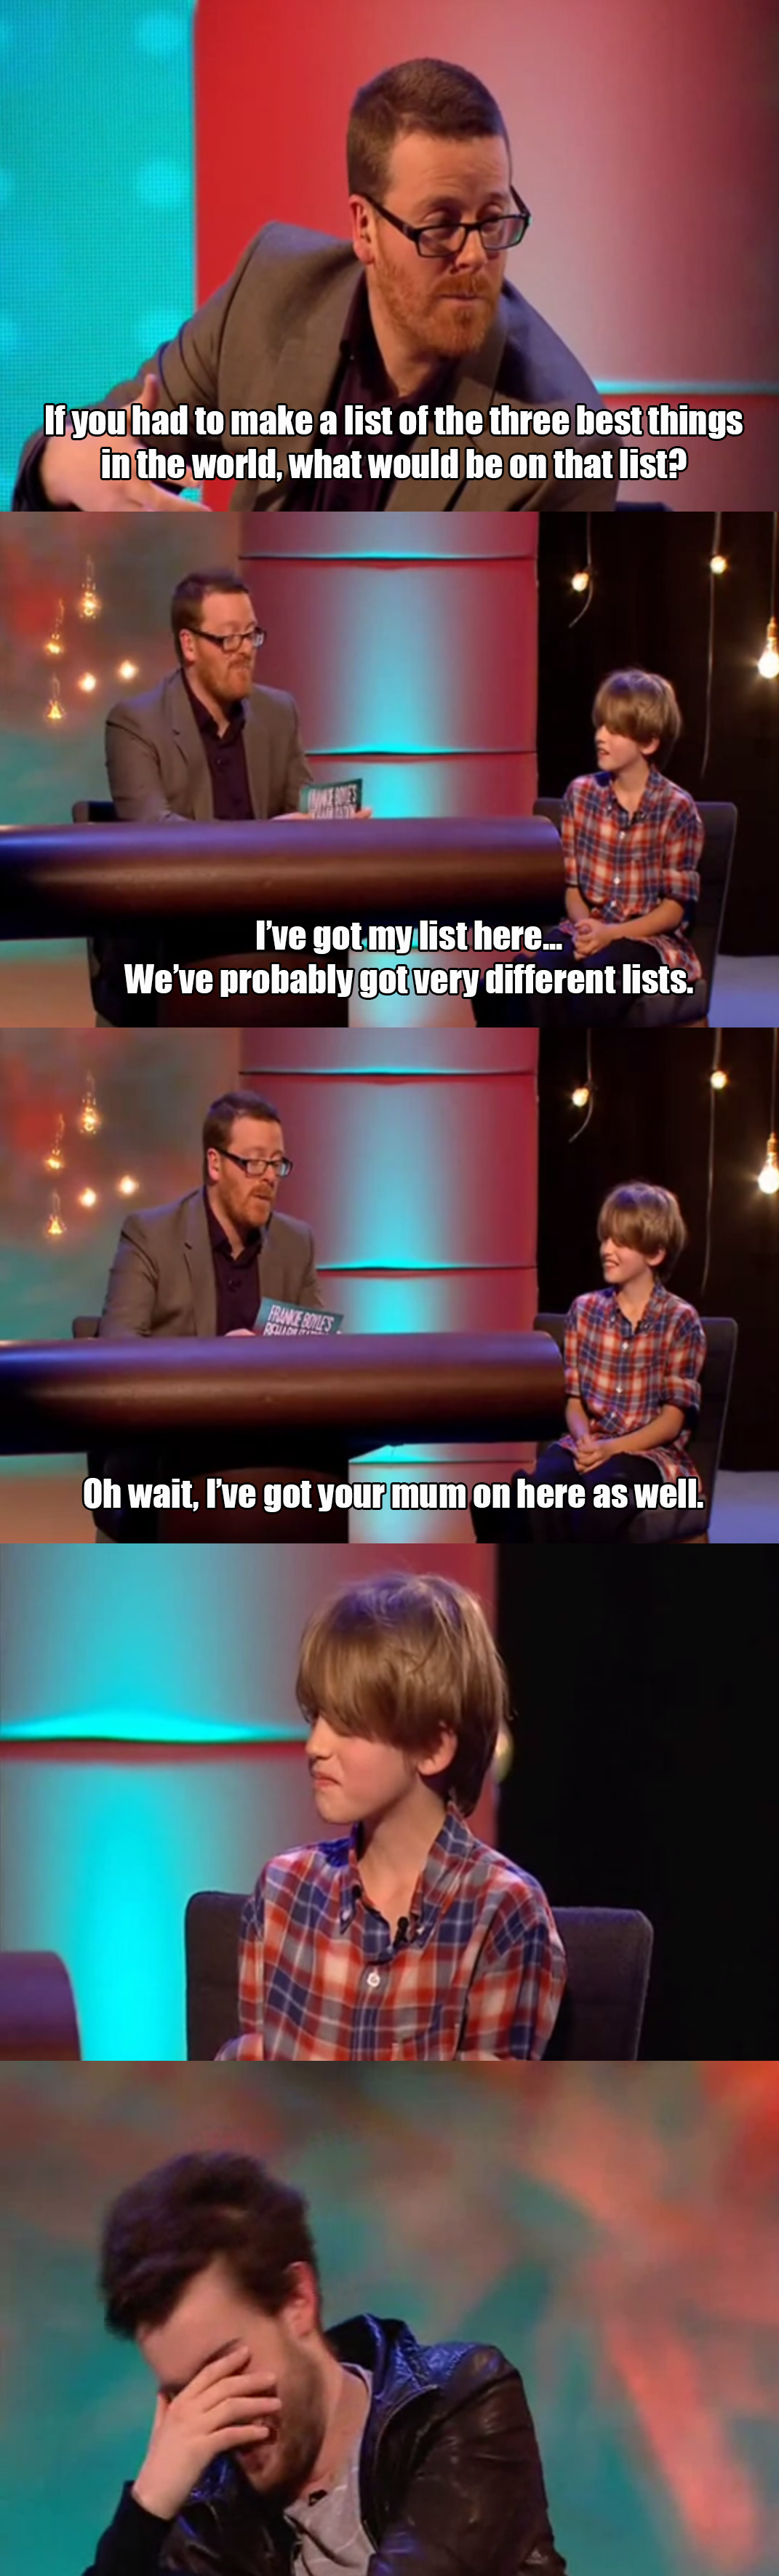 Some people should not be allowed to talk to children at all, let alone on national TV.